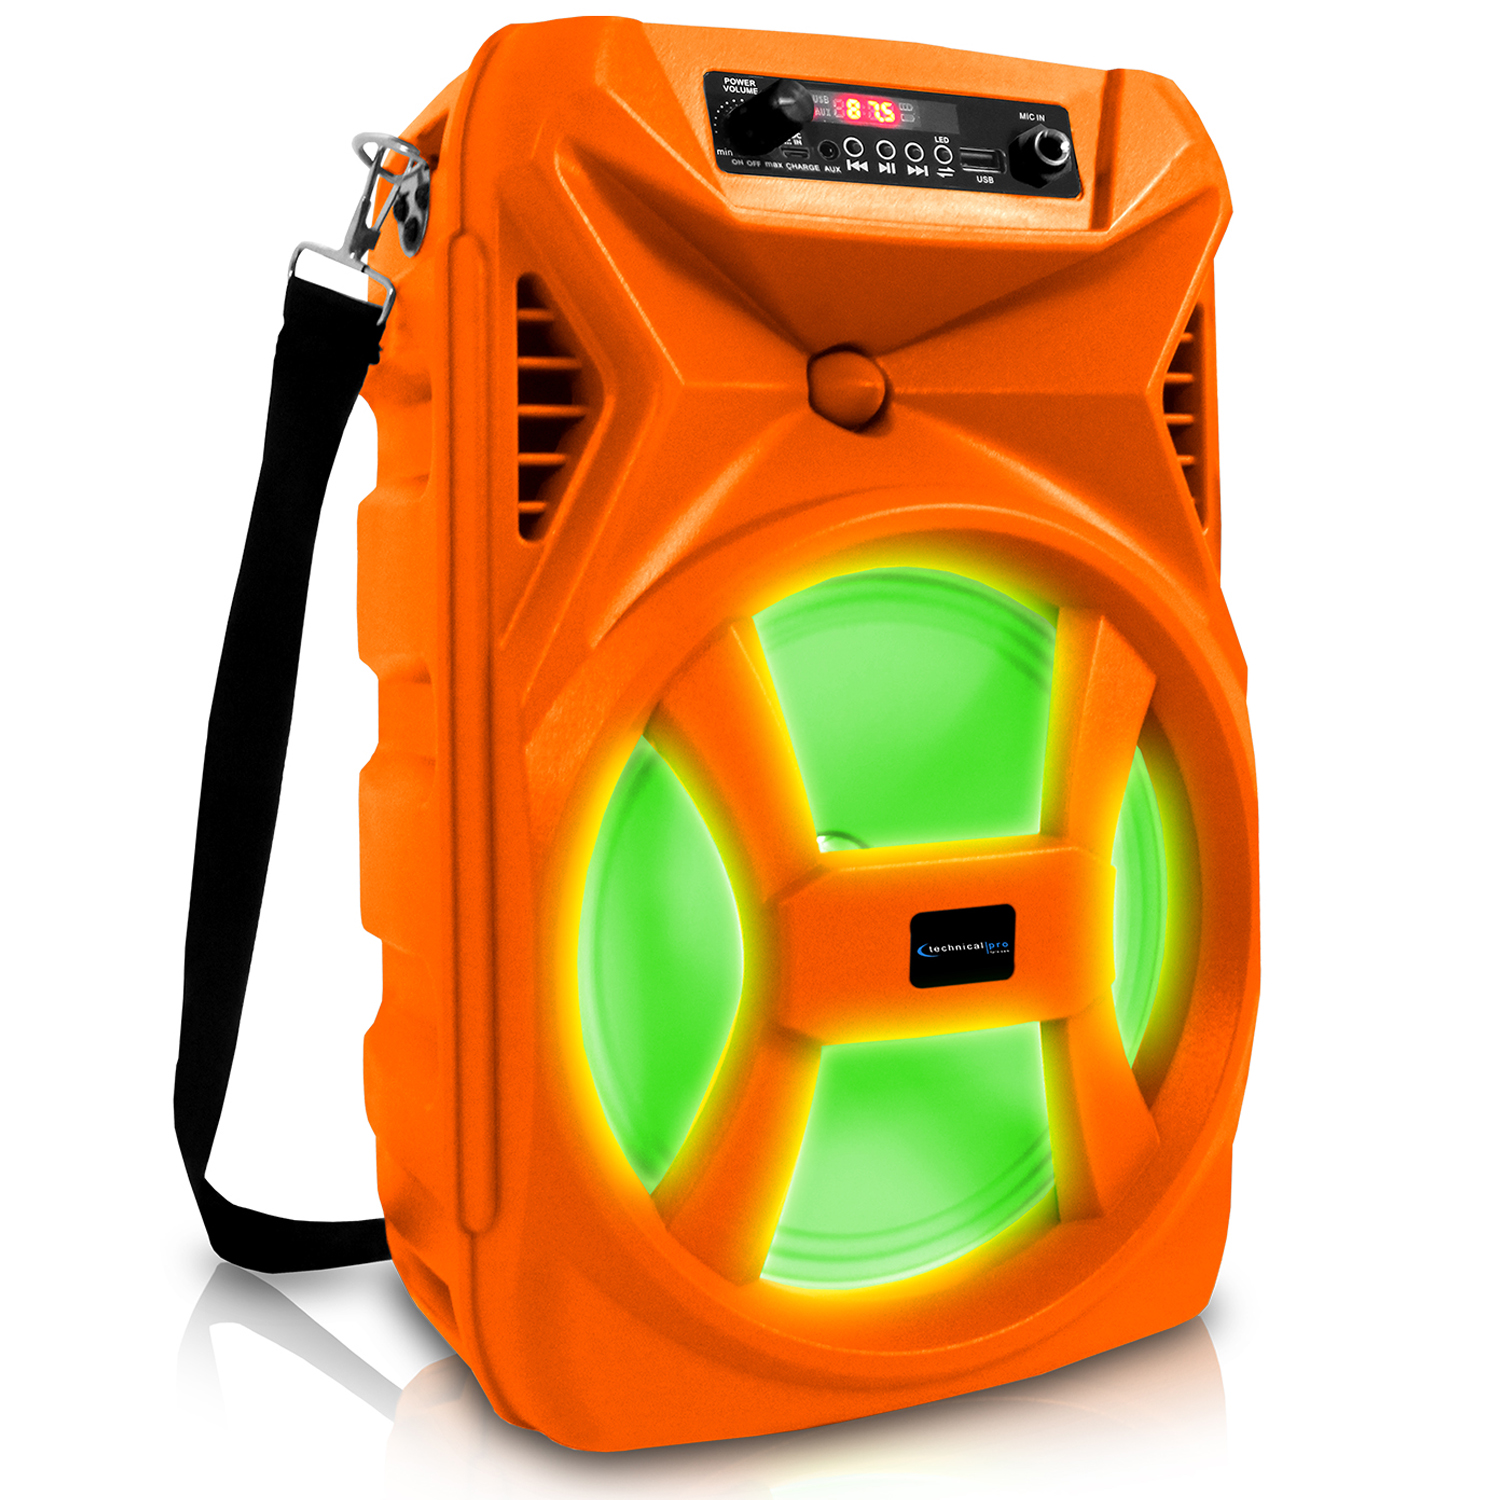 Technical Pro 8 Inch 500 Watts Portable Bluetooth Speaker with Woofer & Tweeter, Festival PA LED Speaker with Bluetooth/USB Card Inputs, True Wireless Stereo, 30 Feet Bluetooth Range(Orange) - image 1 of 7